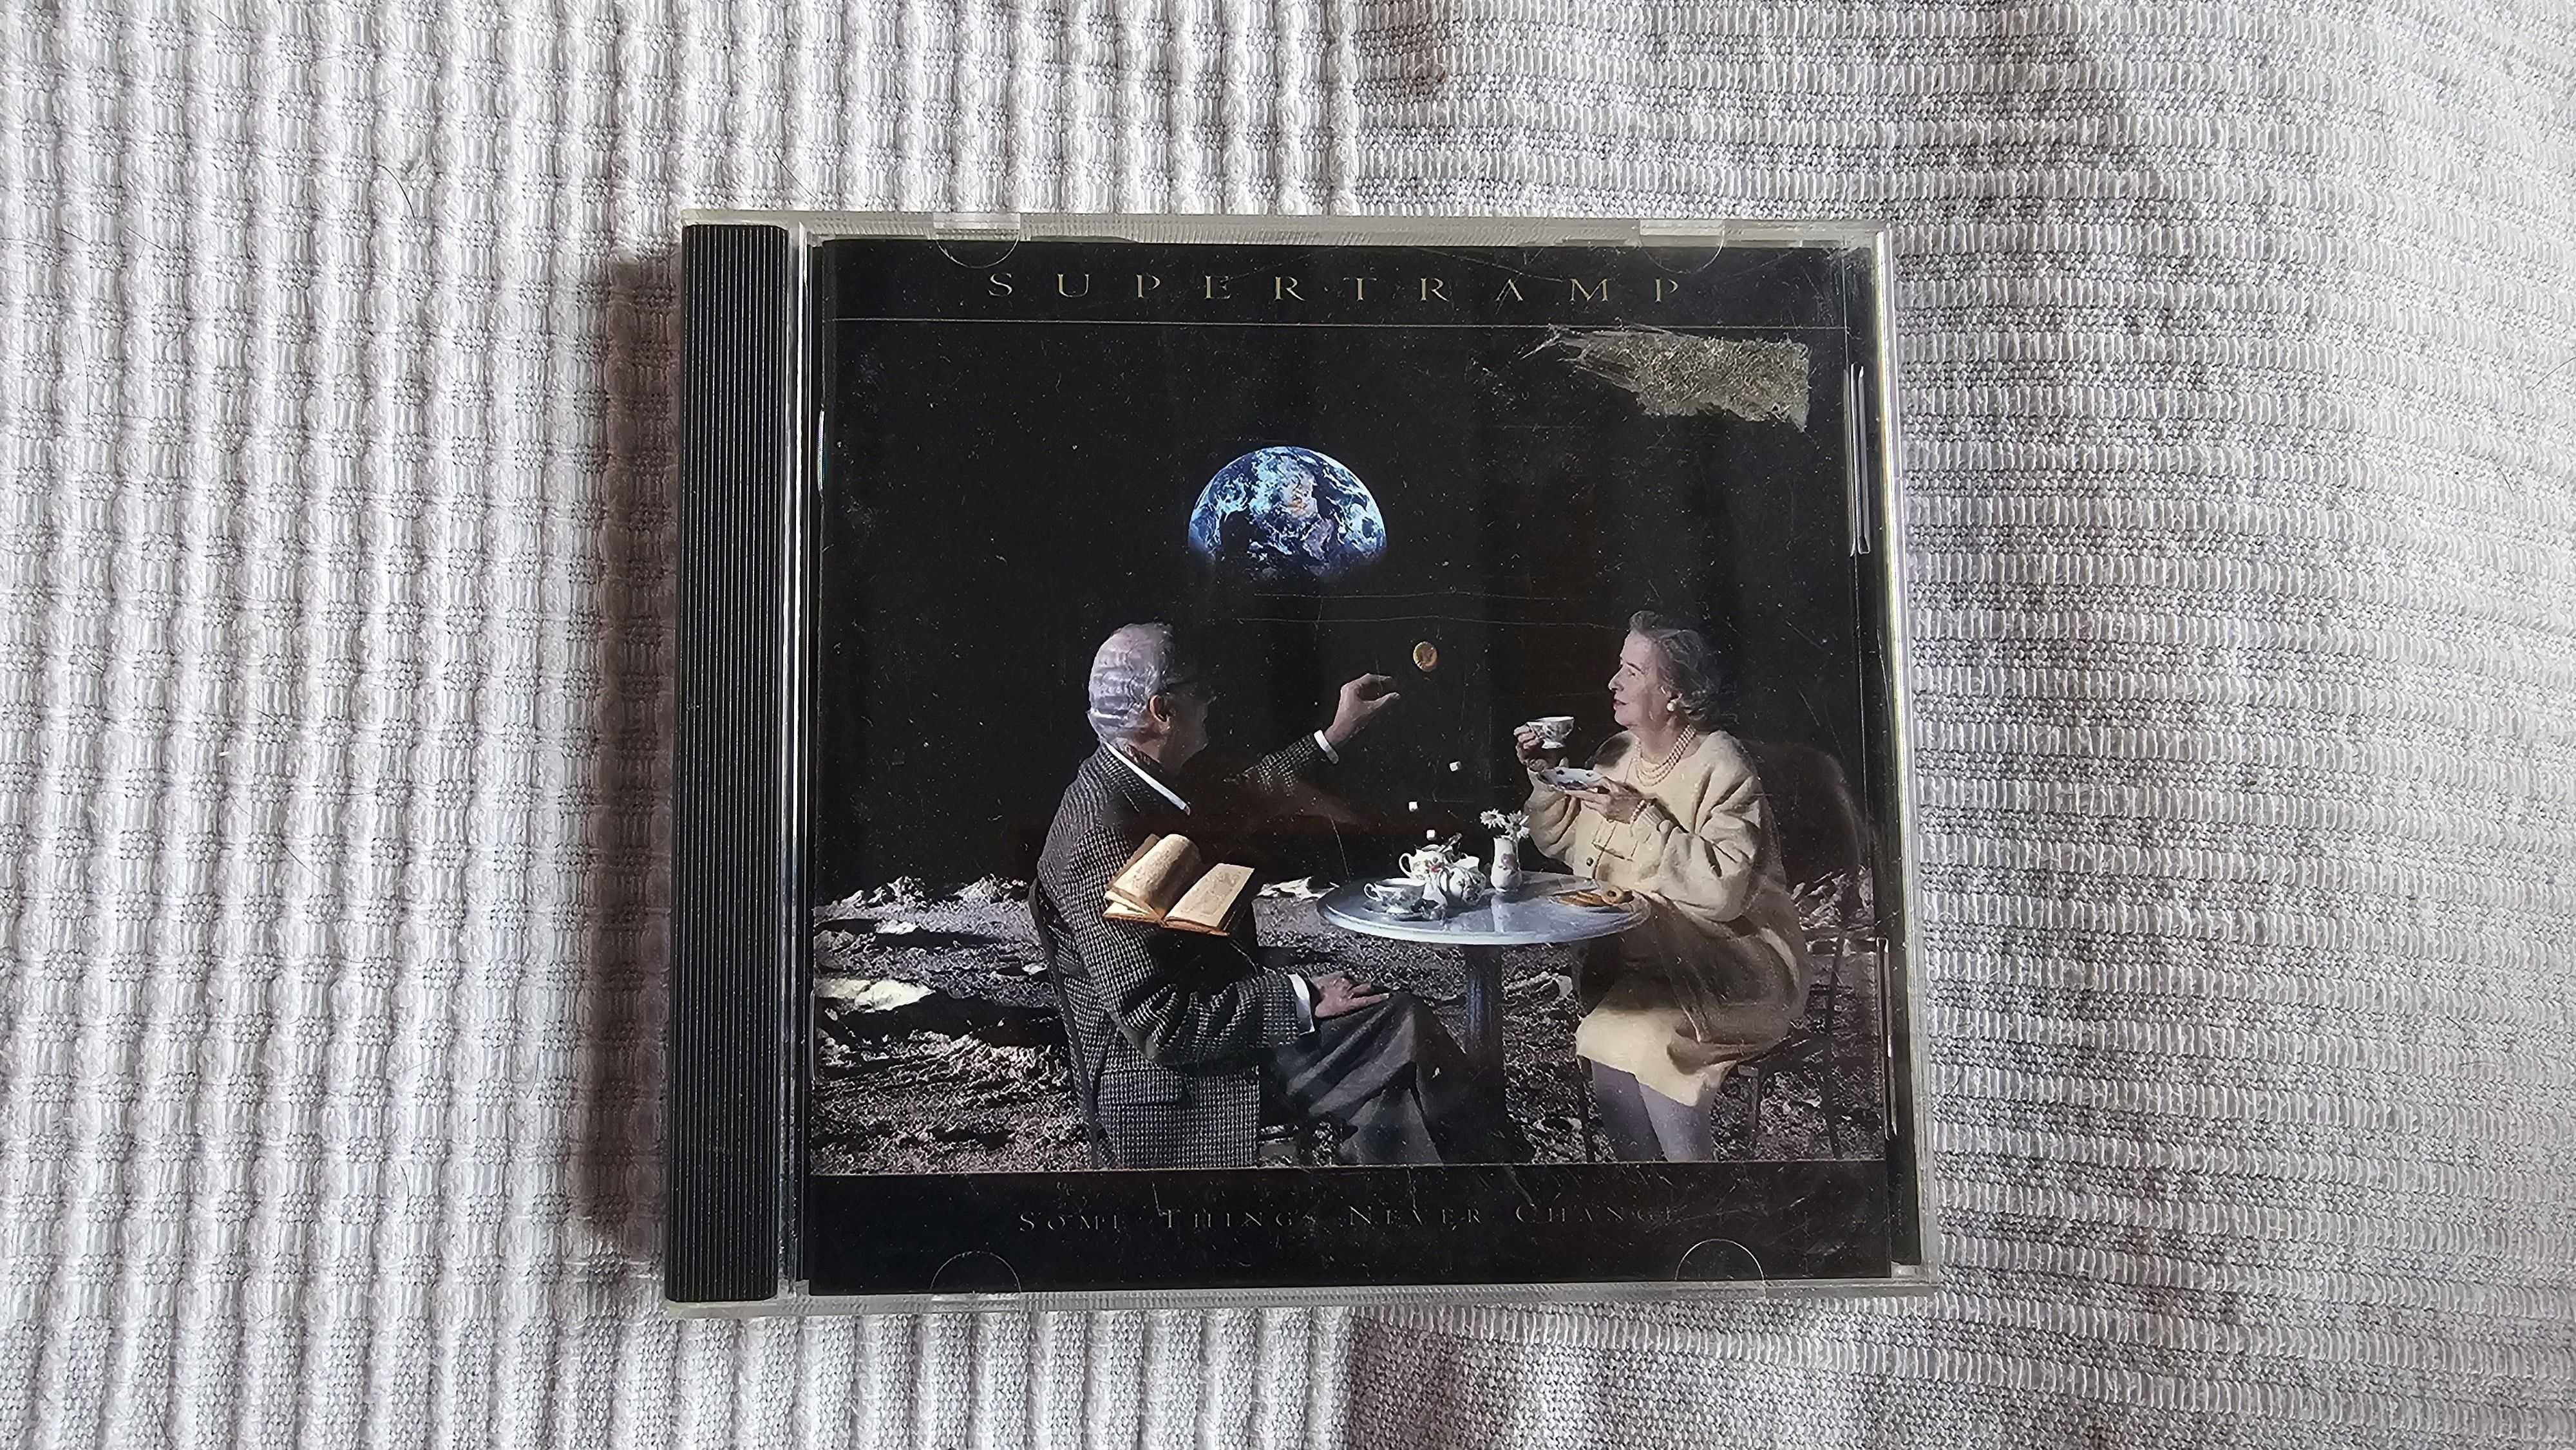 CD SUPERTRAMP - Some things never change